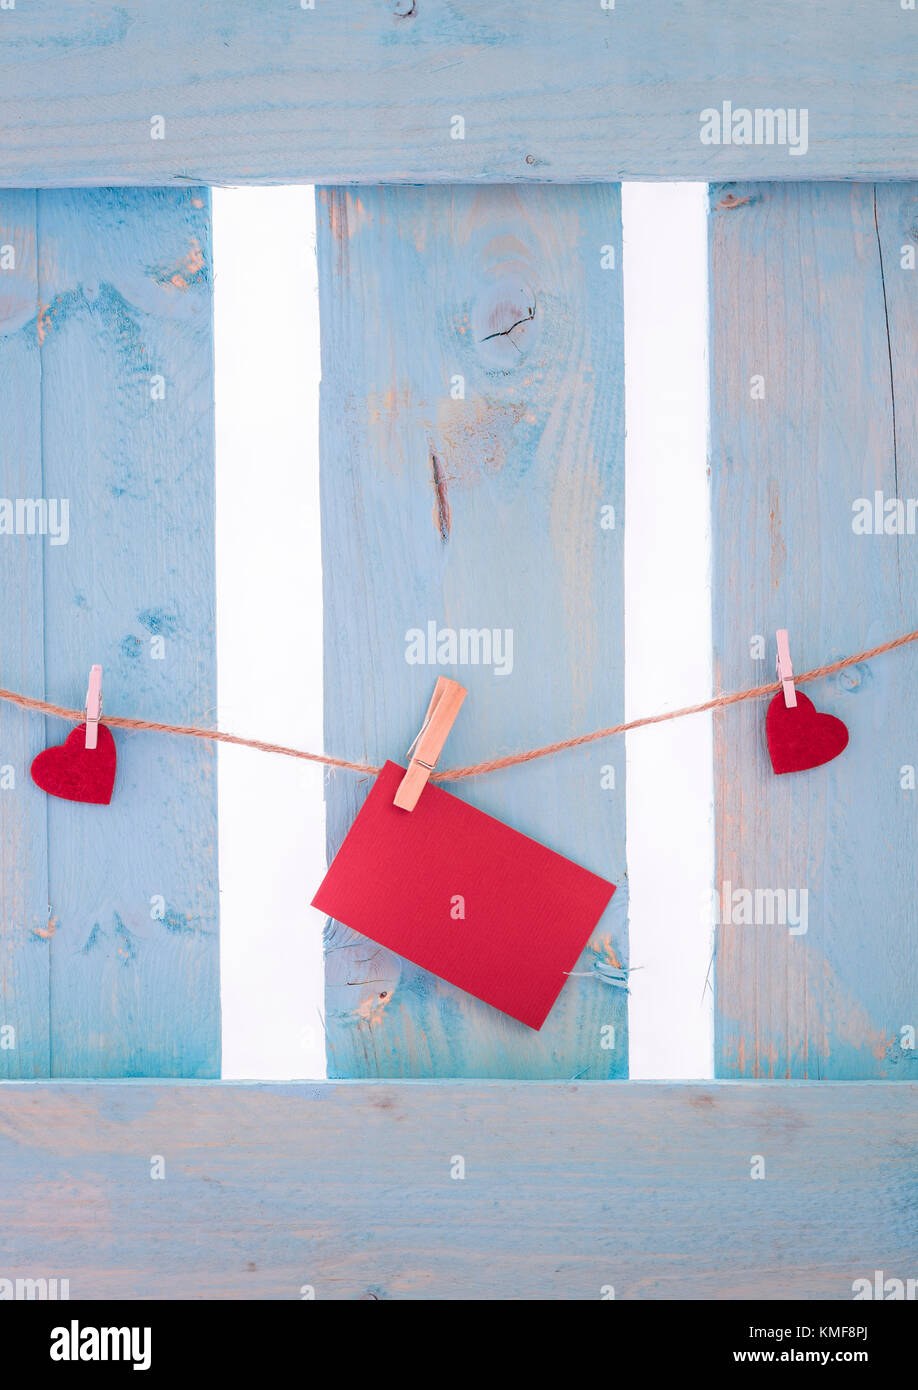 Unwritten red paper note surrounded by red hearts, tied to a linen string with wooden clips, on a blue fence. Stock Photo